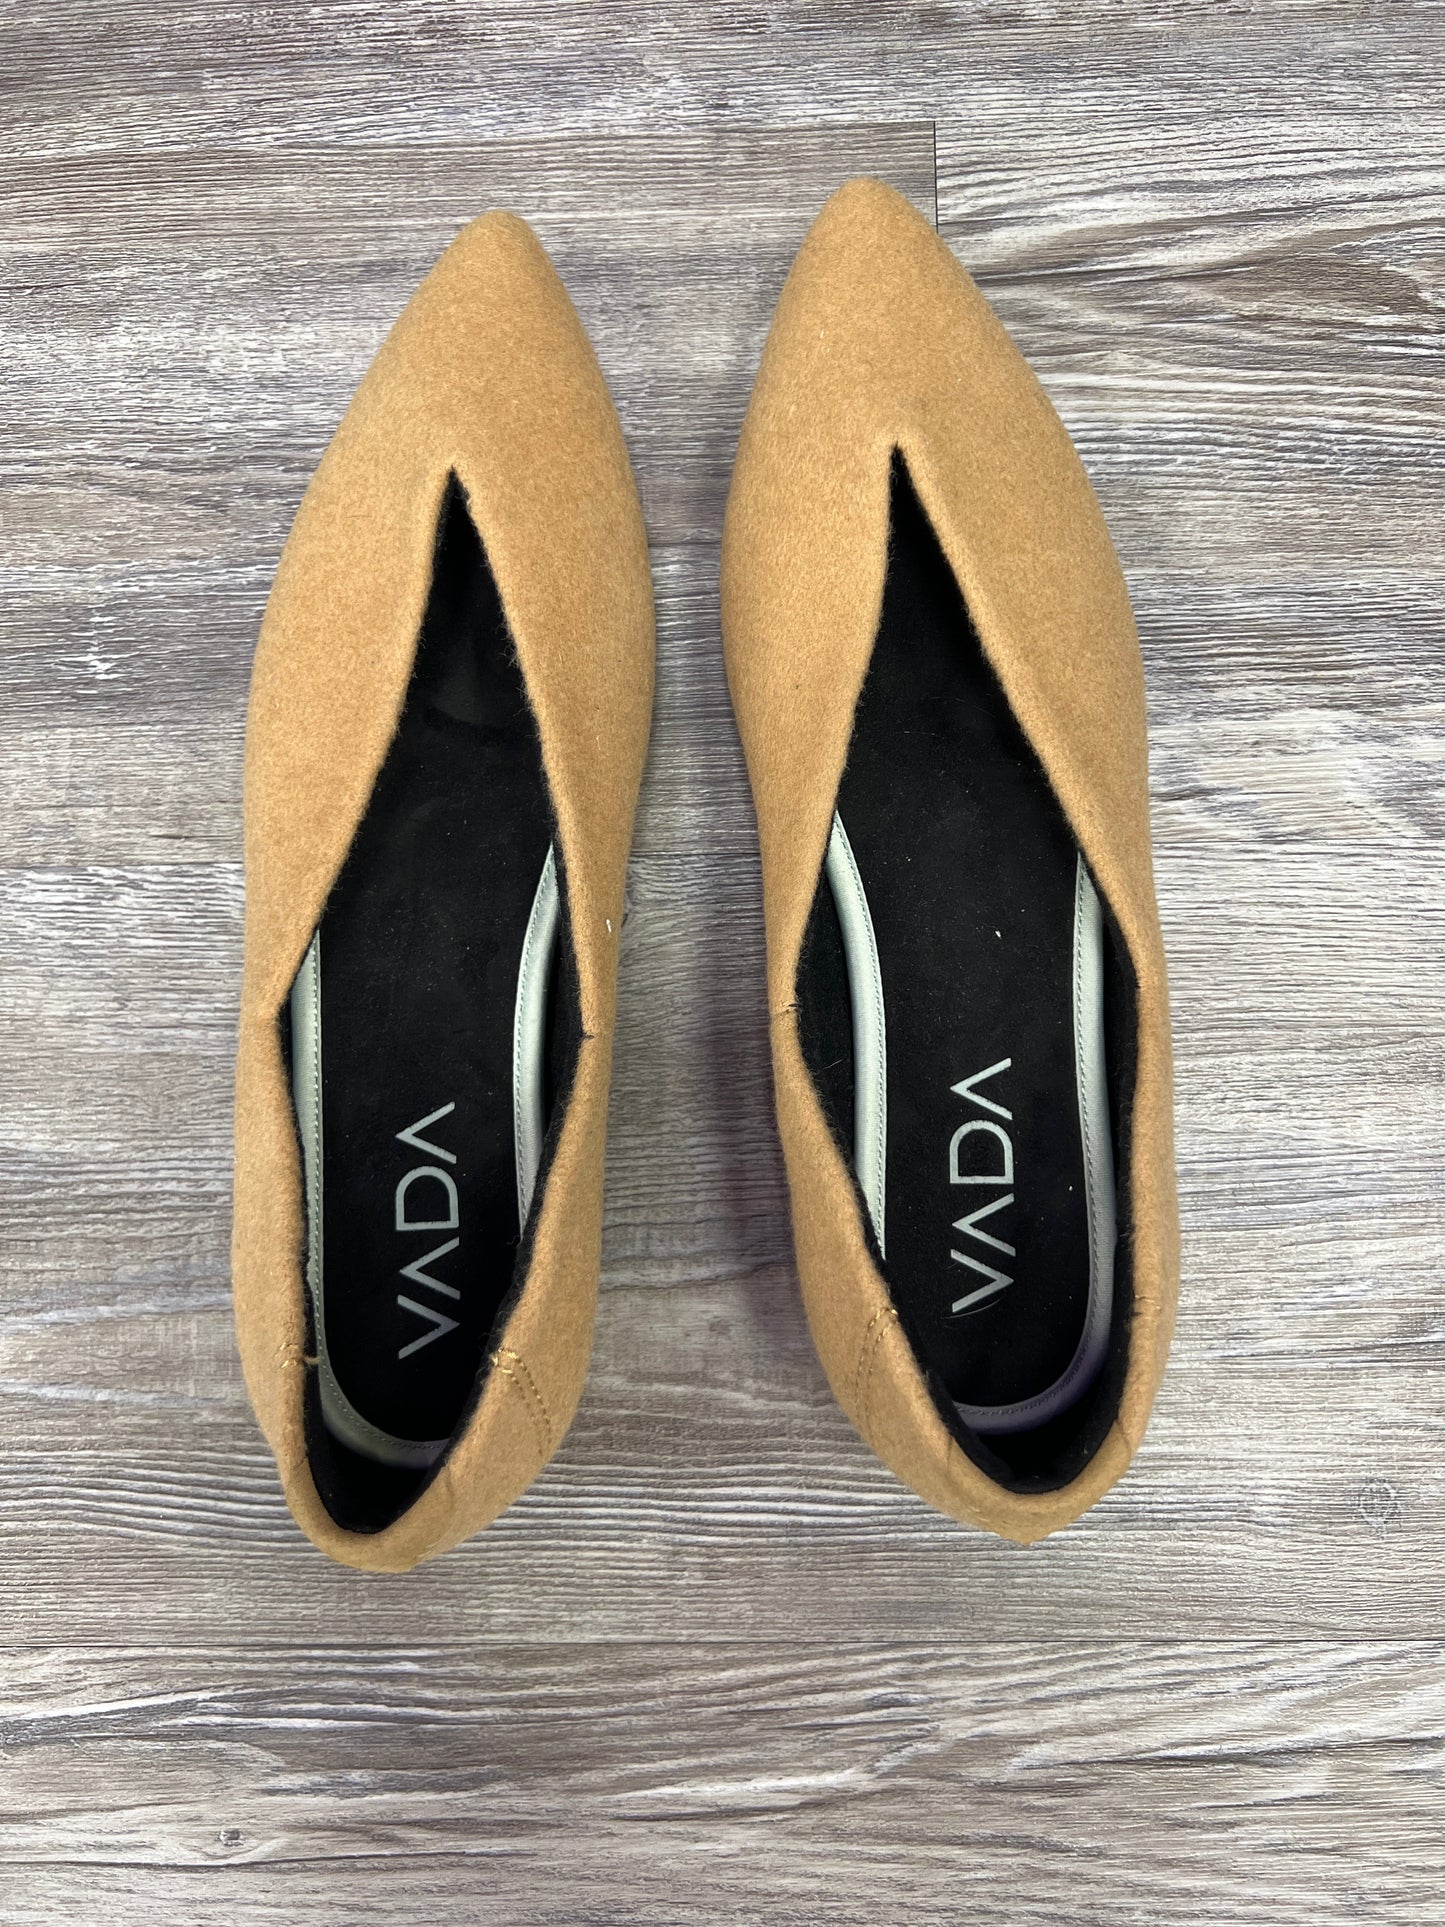 Shoes Flats Ballet By VADA Size: 9.5